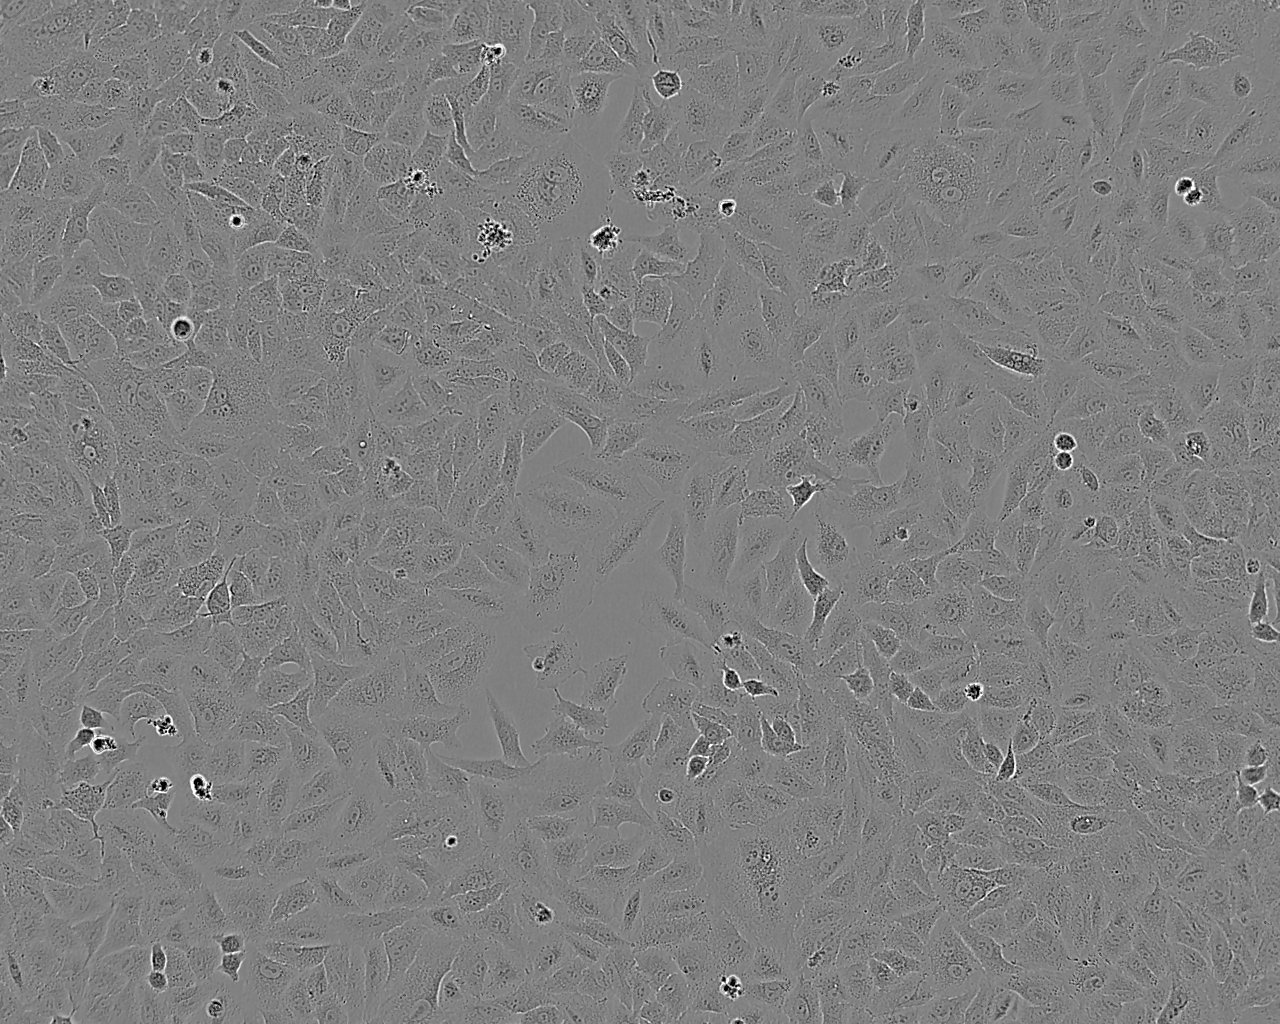 LCLC-103H epithelioid cells人肺癌细胞系,LCLC-103H epithelioid cells